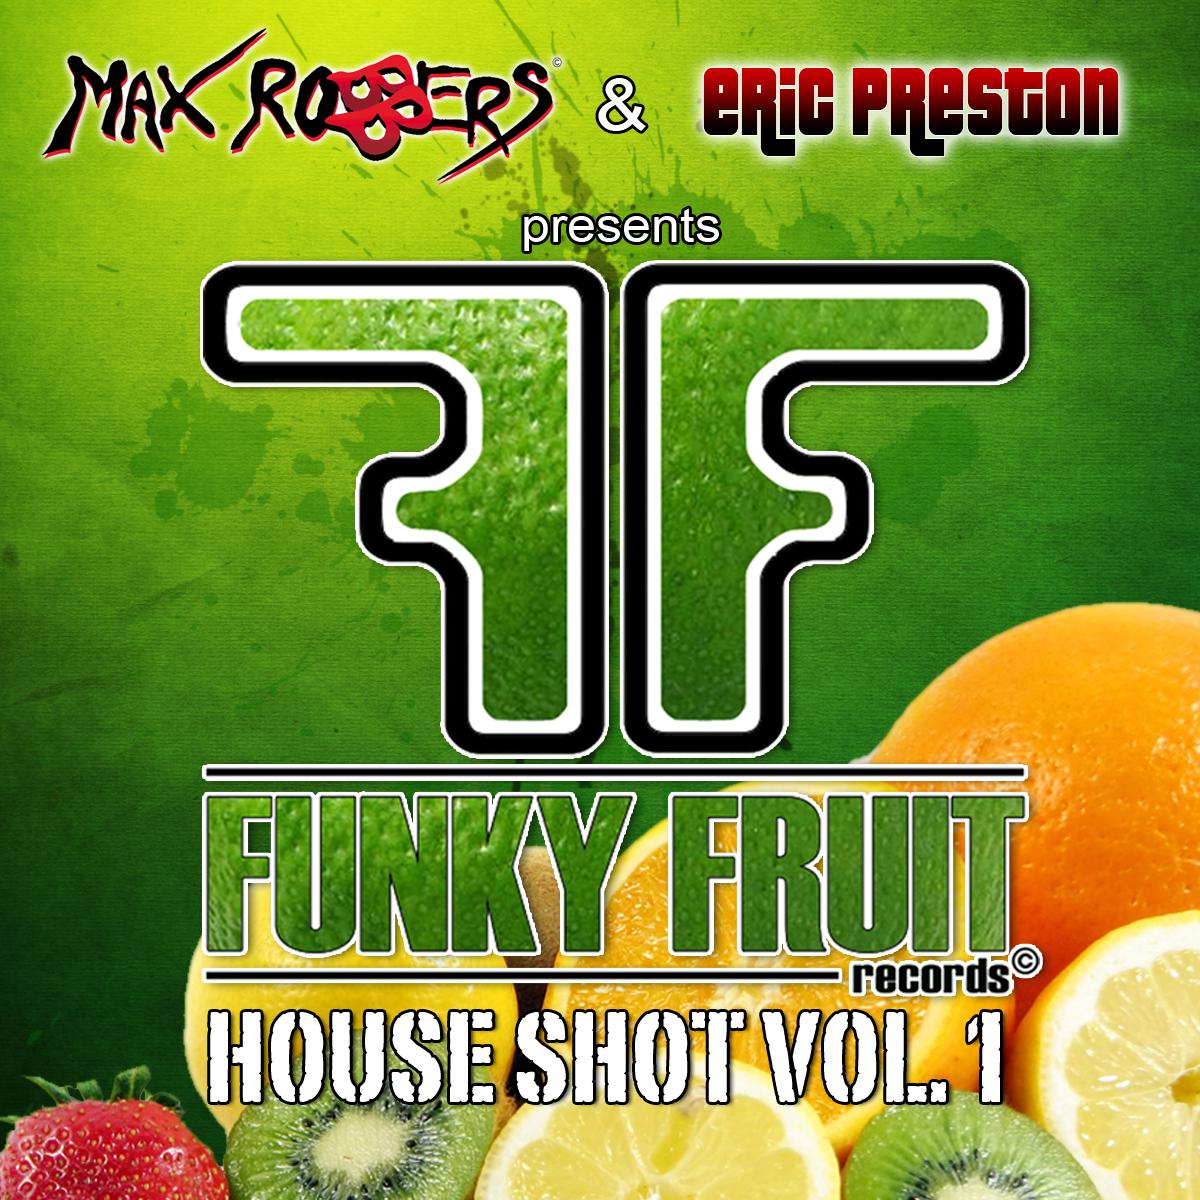 Funky Fruit House Shot Vol. 1 by Max Robbers and Eric Pretion